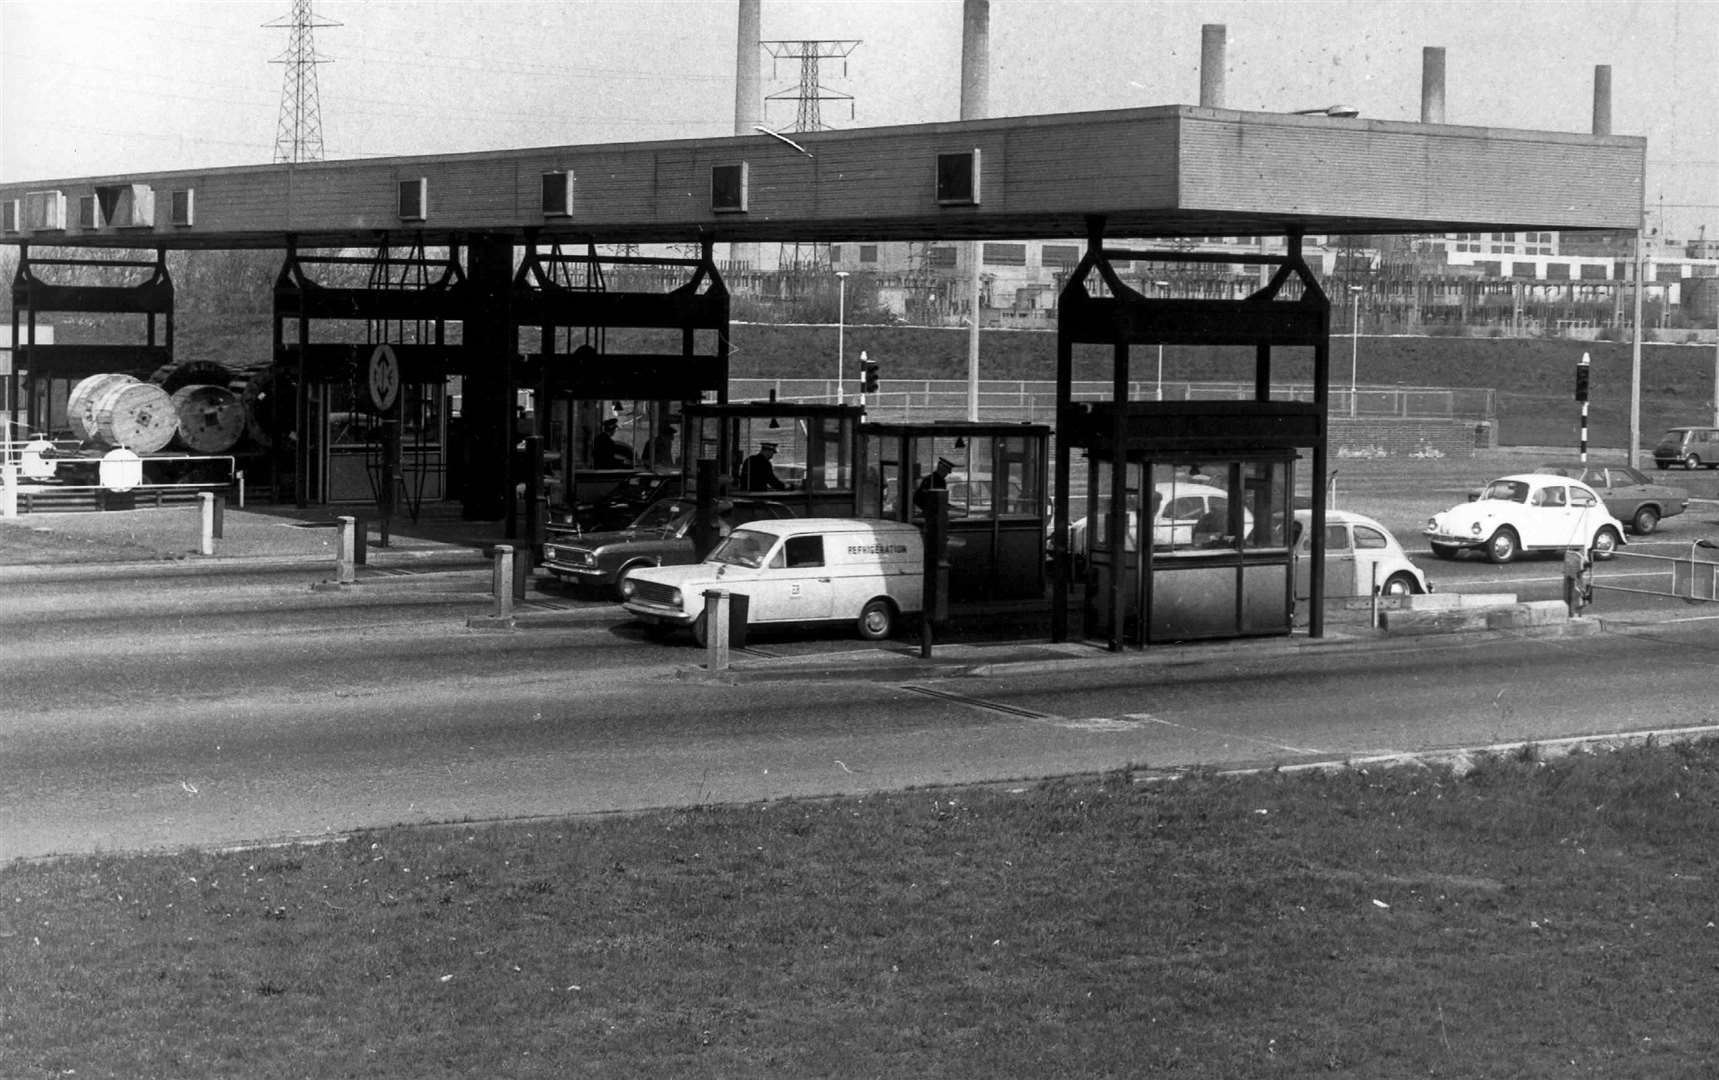 The toll gates at the Dartford Tunnel pictured in May 1970. It had opened seven years earlier